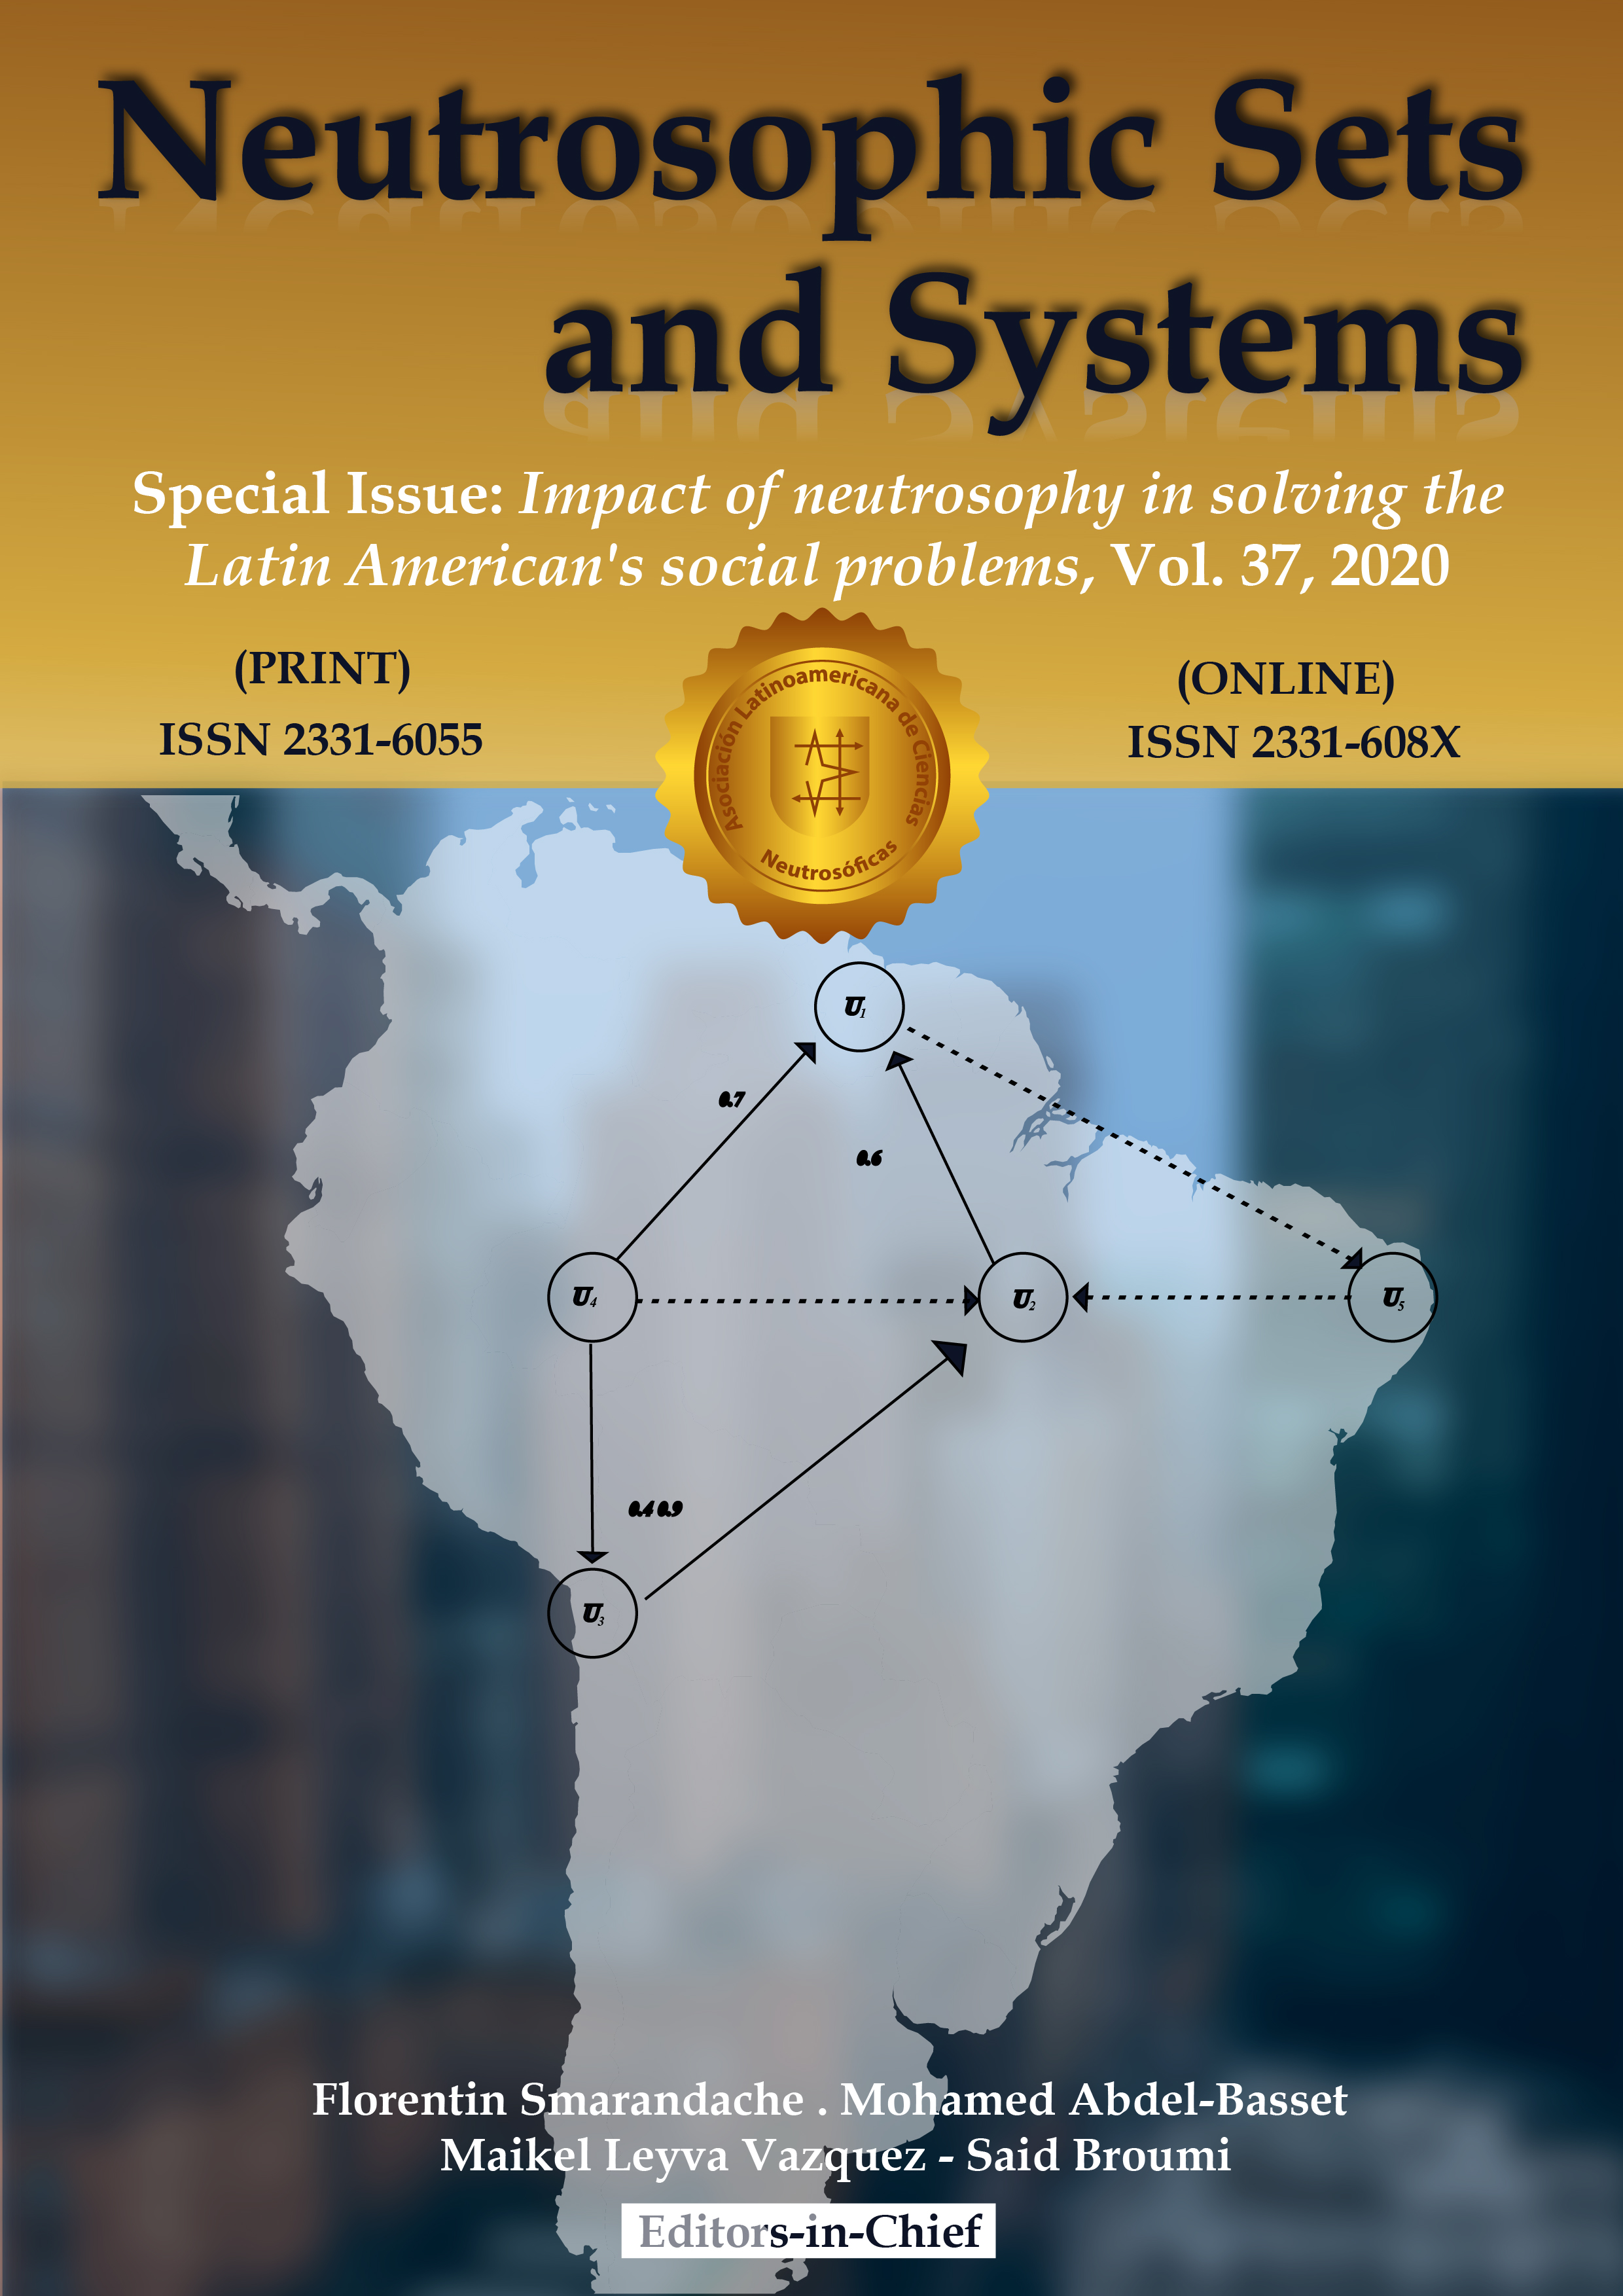 					View Vol. 37 (2020): Neutrosophic Sets and Systems, {Special Issue: Impact of neutrosophy in solving the Latin American s social problems}
				